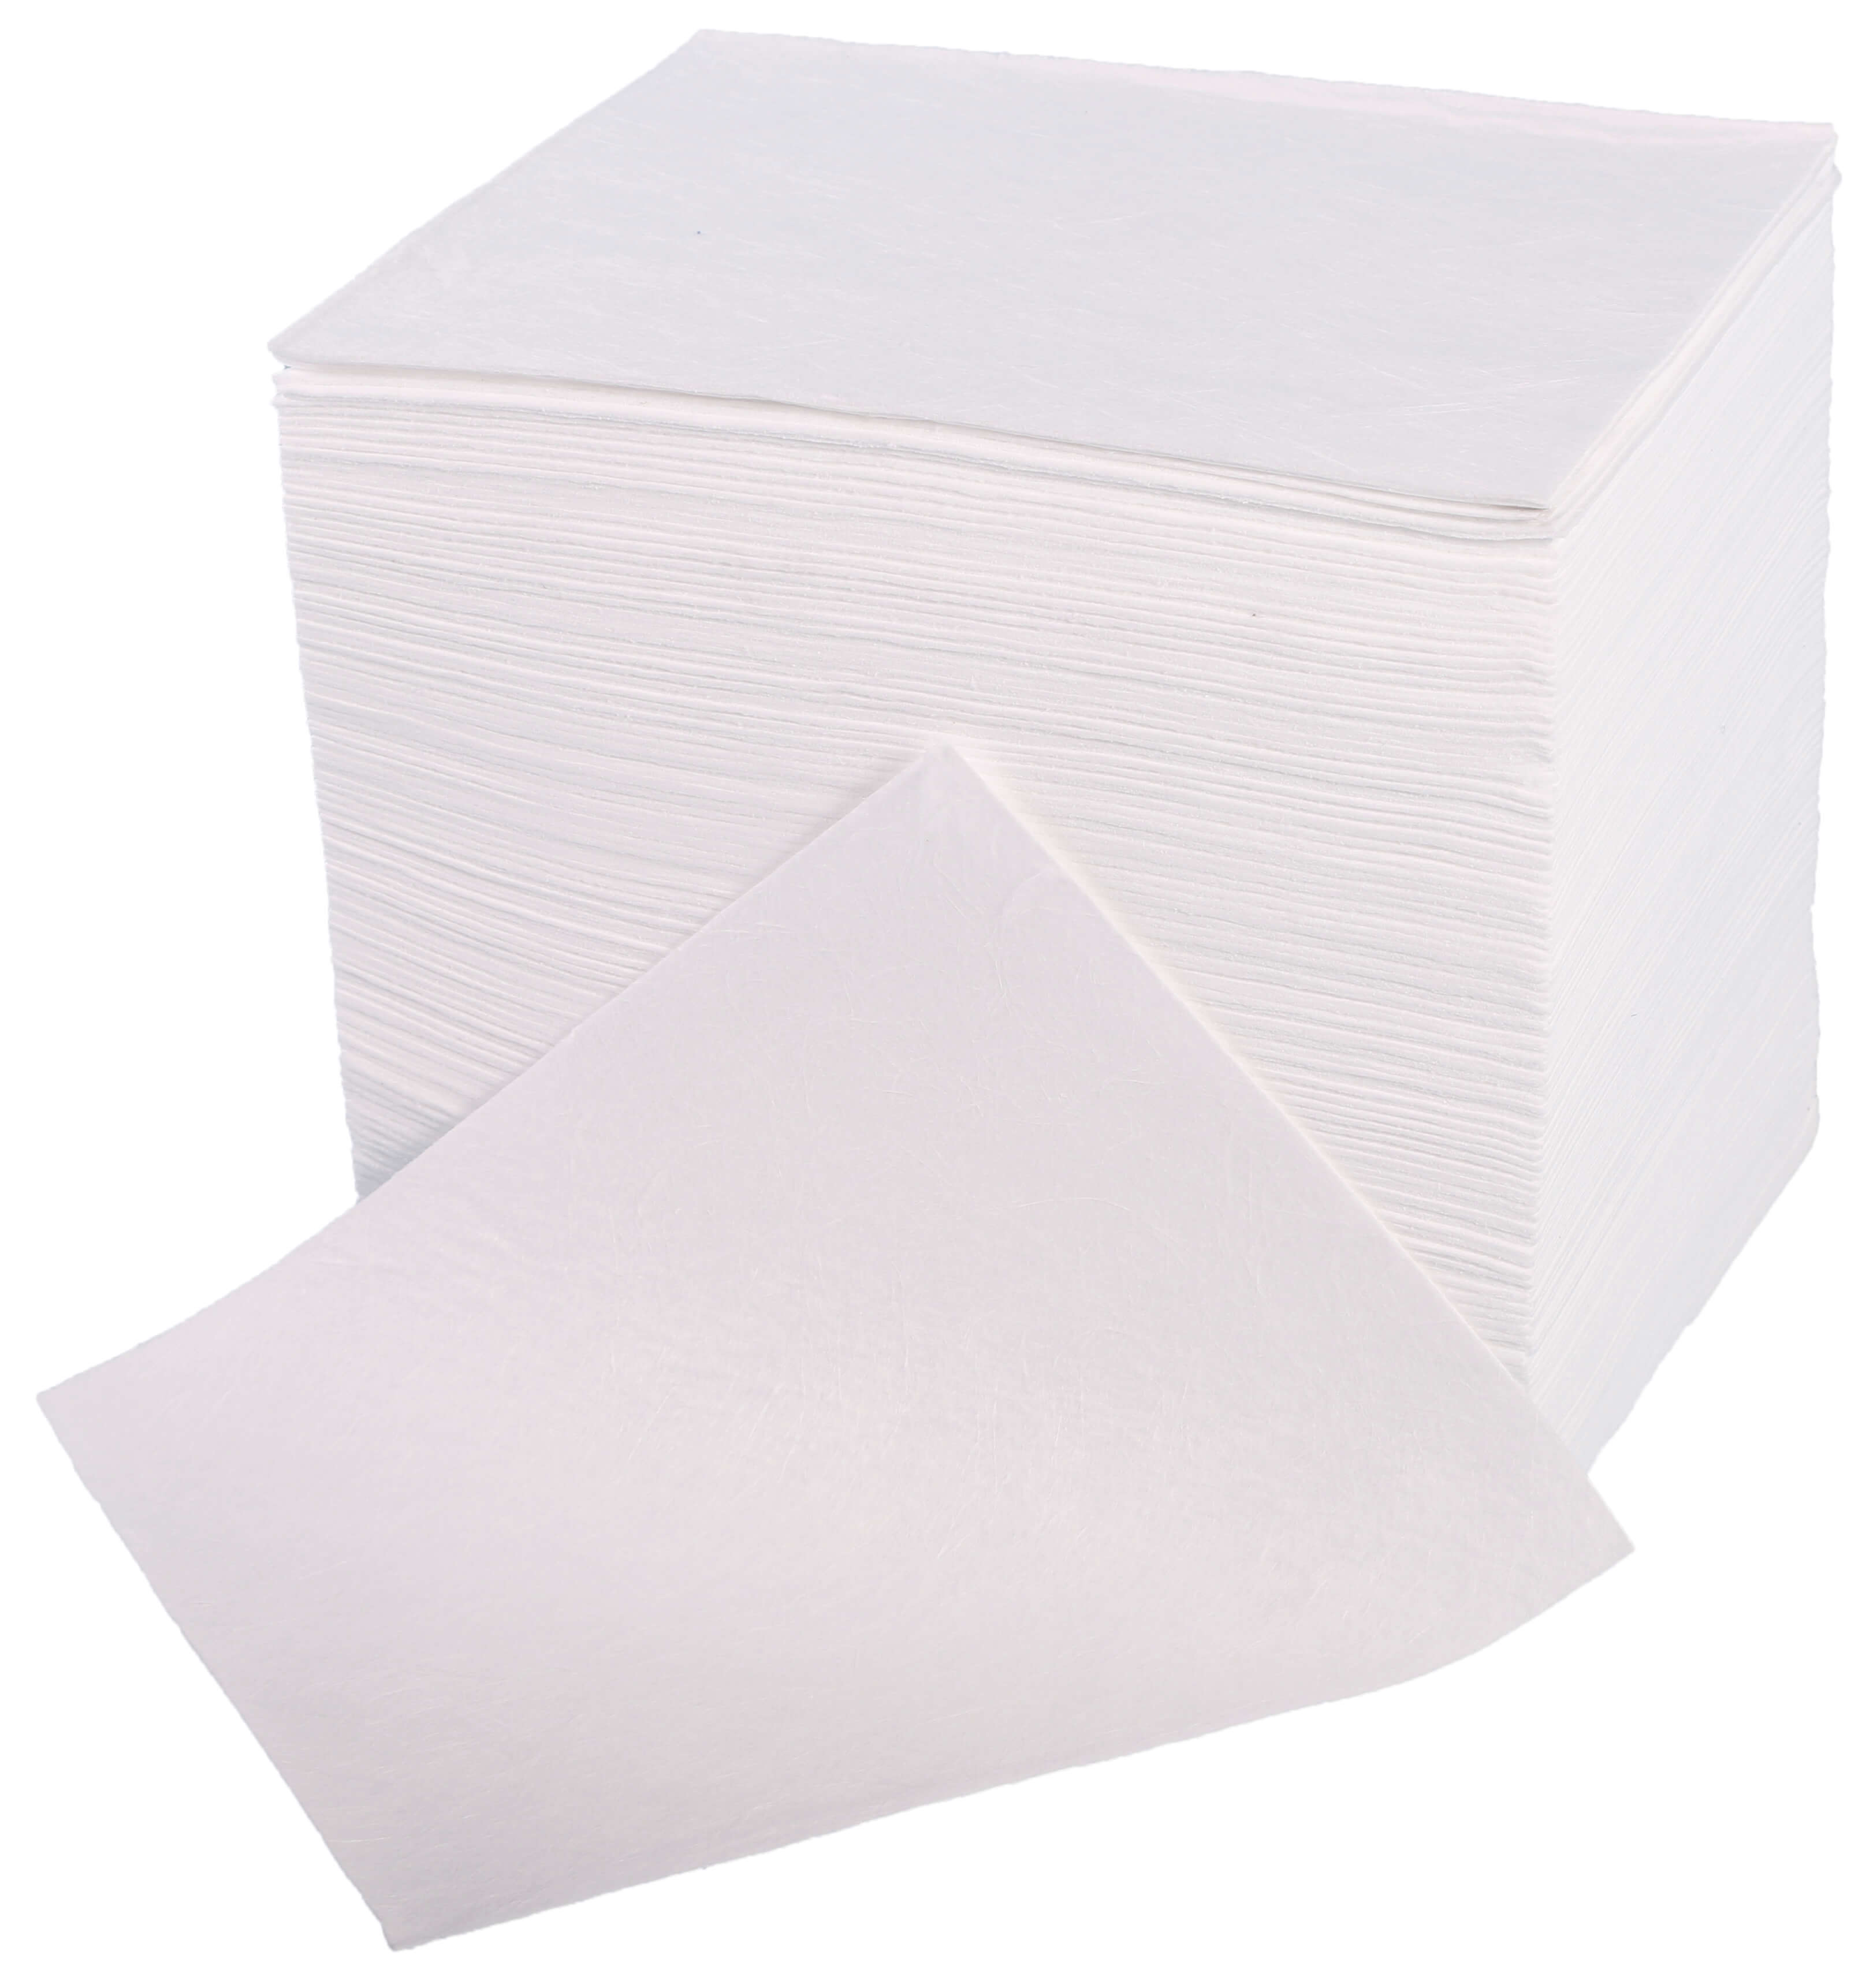 Single Weight Hydraulic Absorbent Pad - Dispenser Box of 50